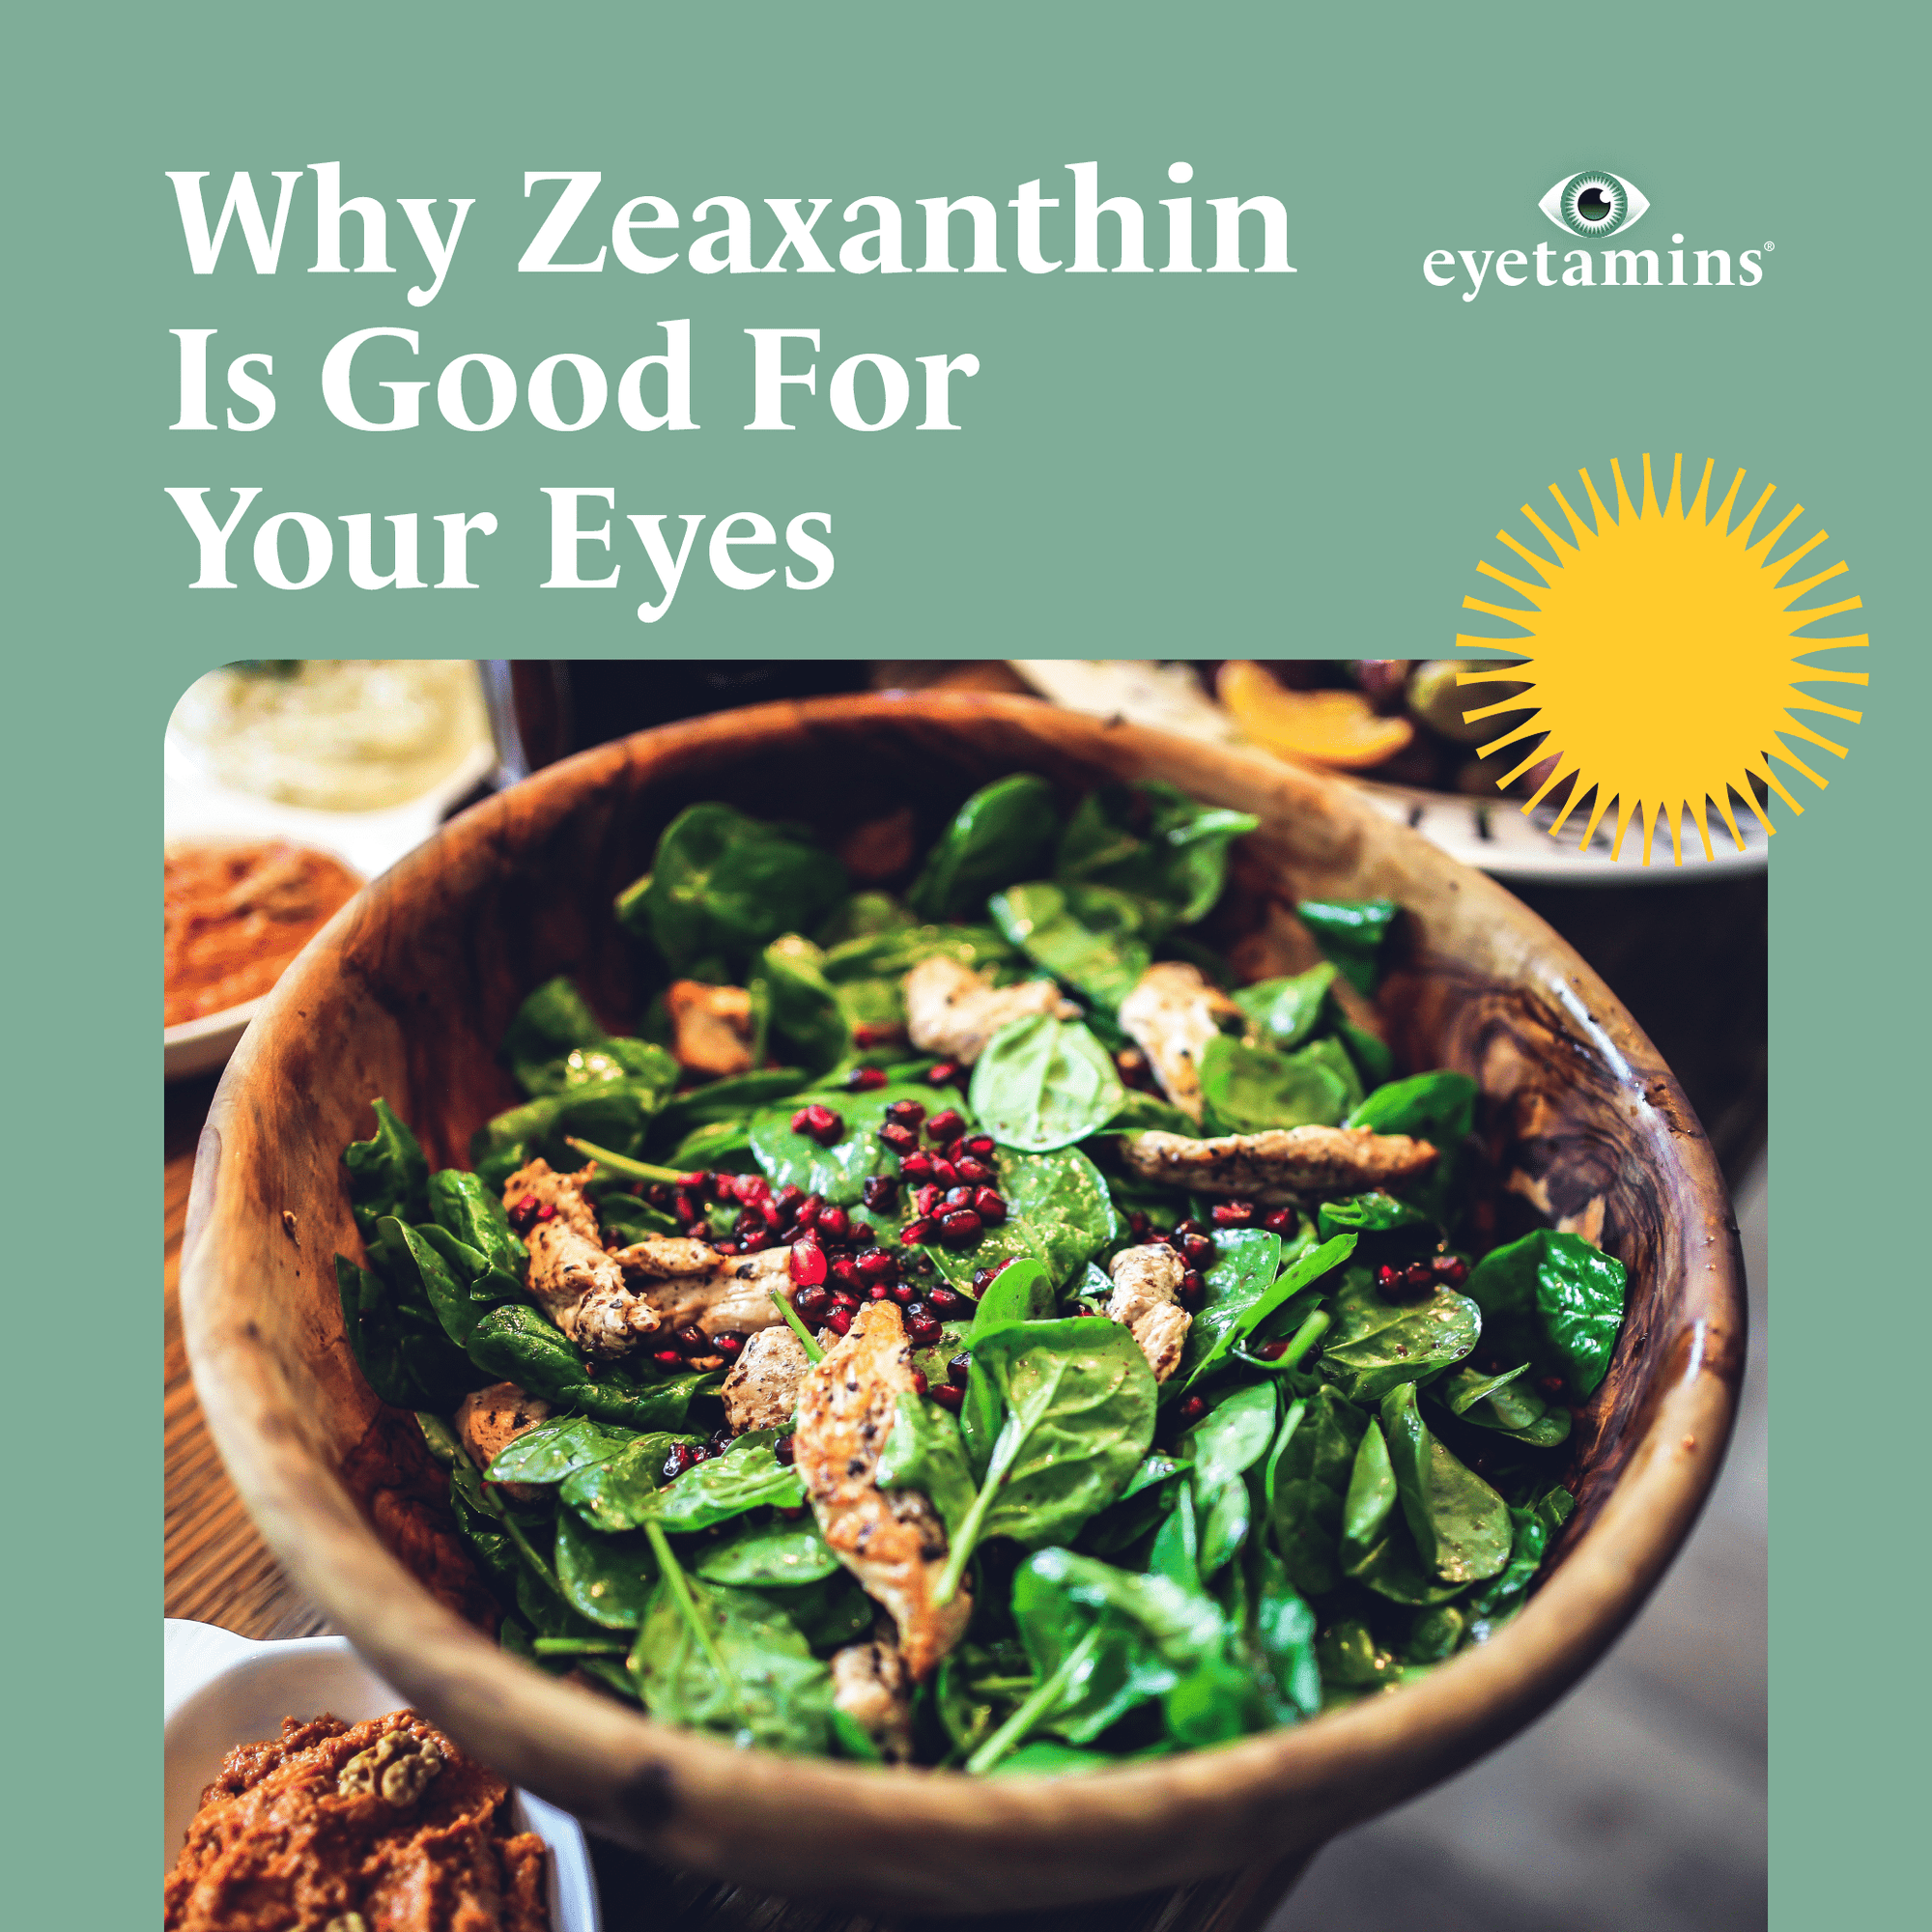 Eyetamins - Why Zeaxanthin Is Good For Your Eyes